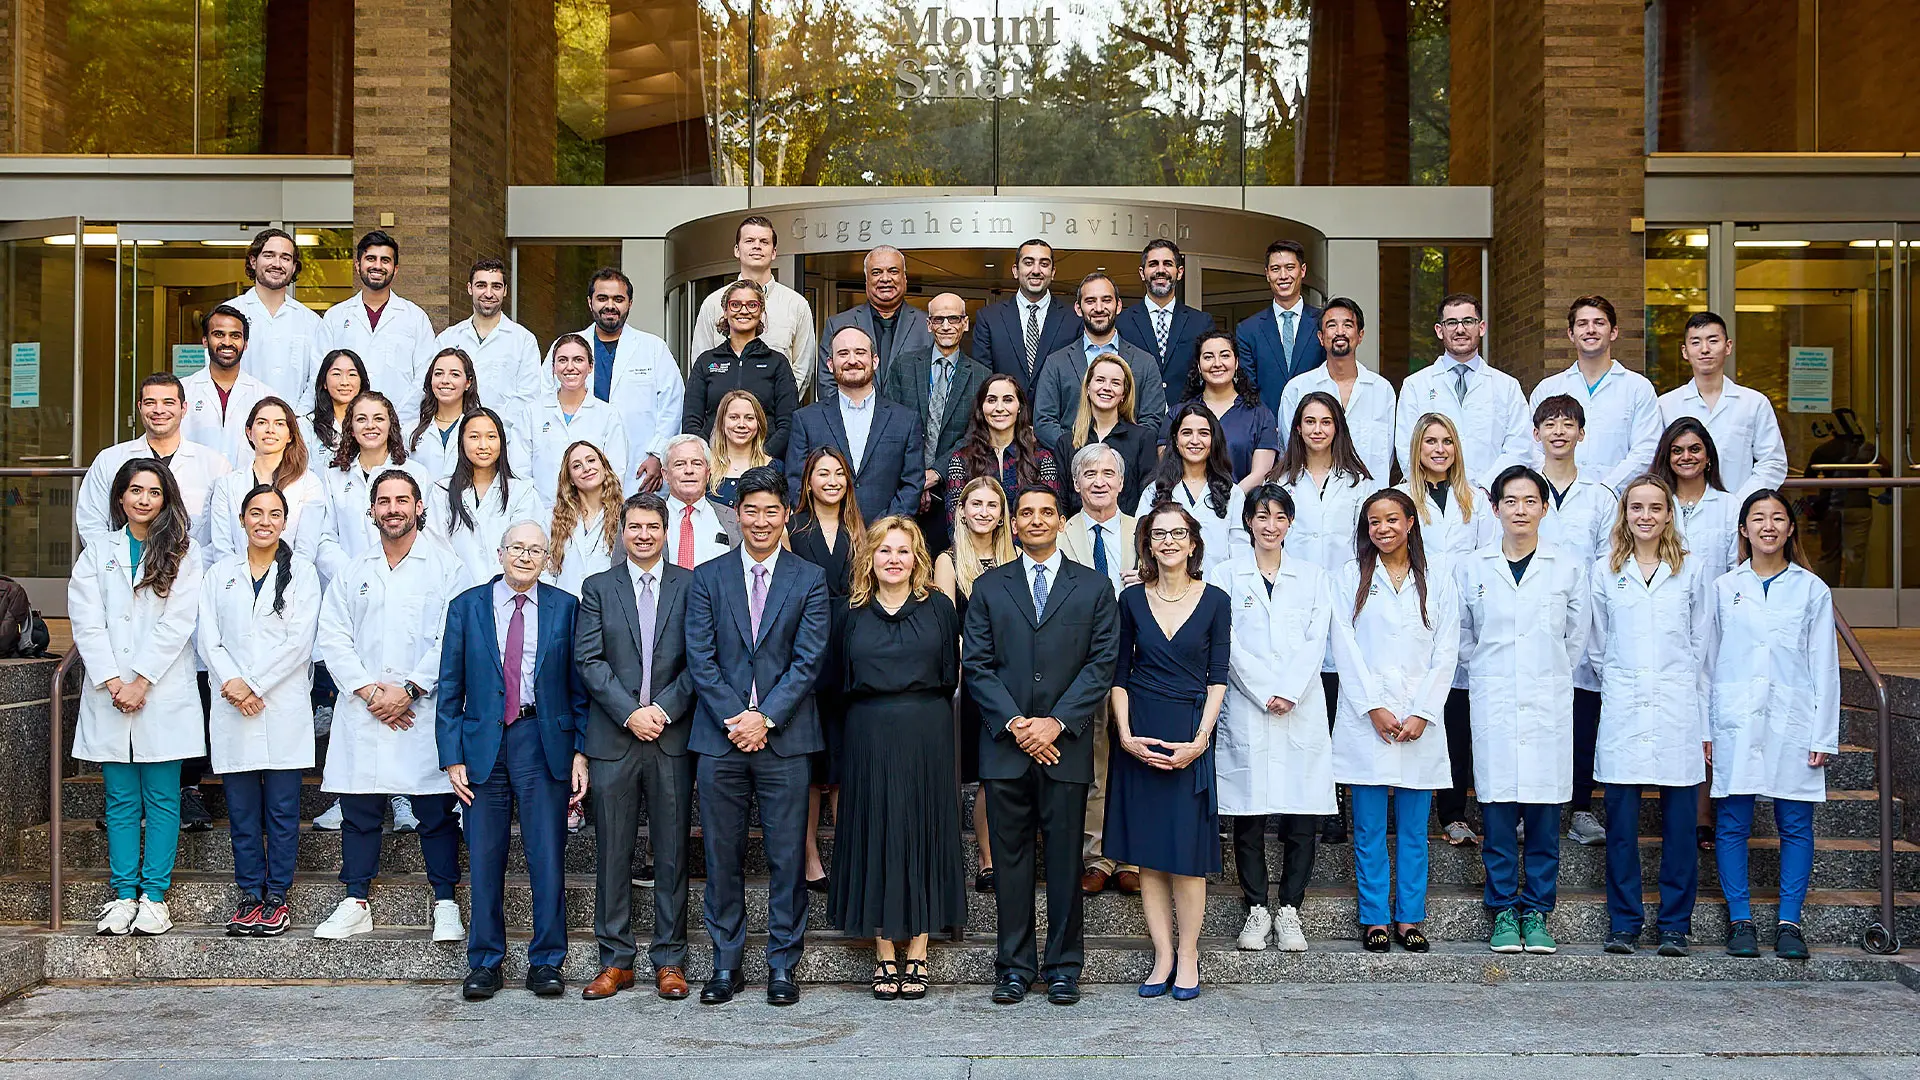 Emma Guttman, MD, PhD, center, with faculty, residents, and fellows of the Kimberly and Eric J. Waldman Department of Dermatology